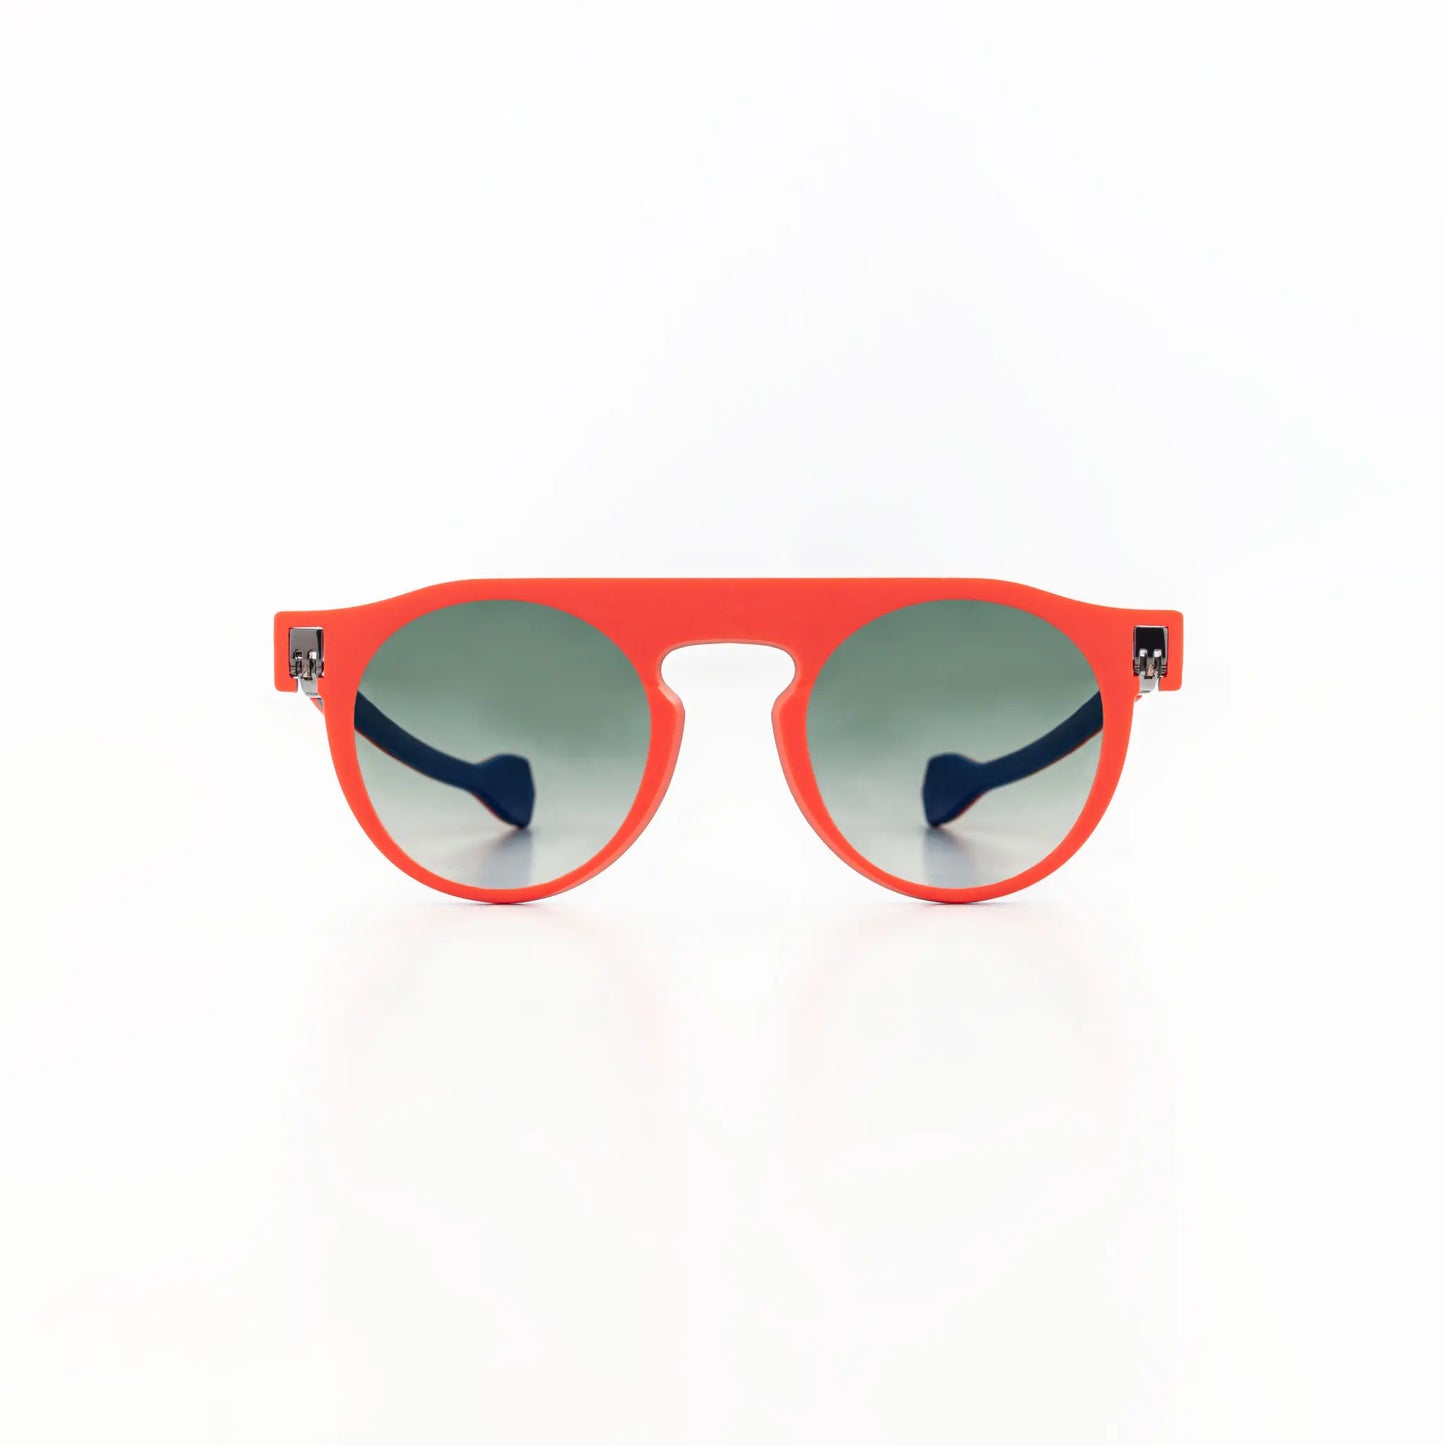 Reverso sunglasses blue & red reversible & ultra light front view 1